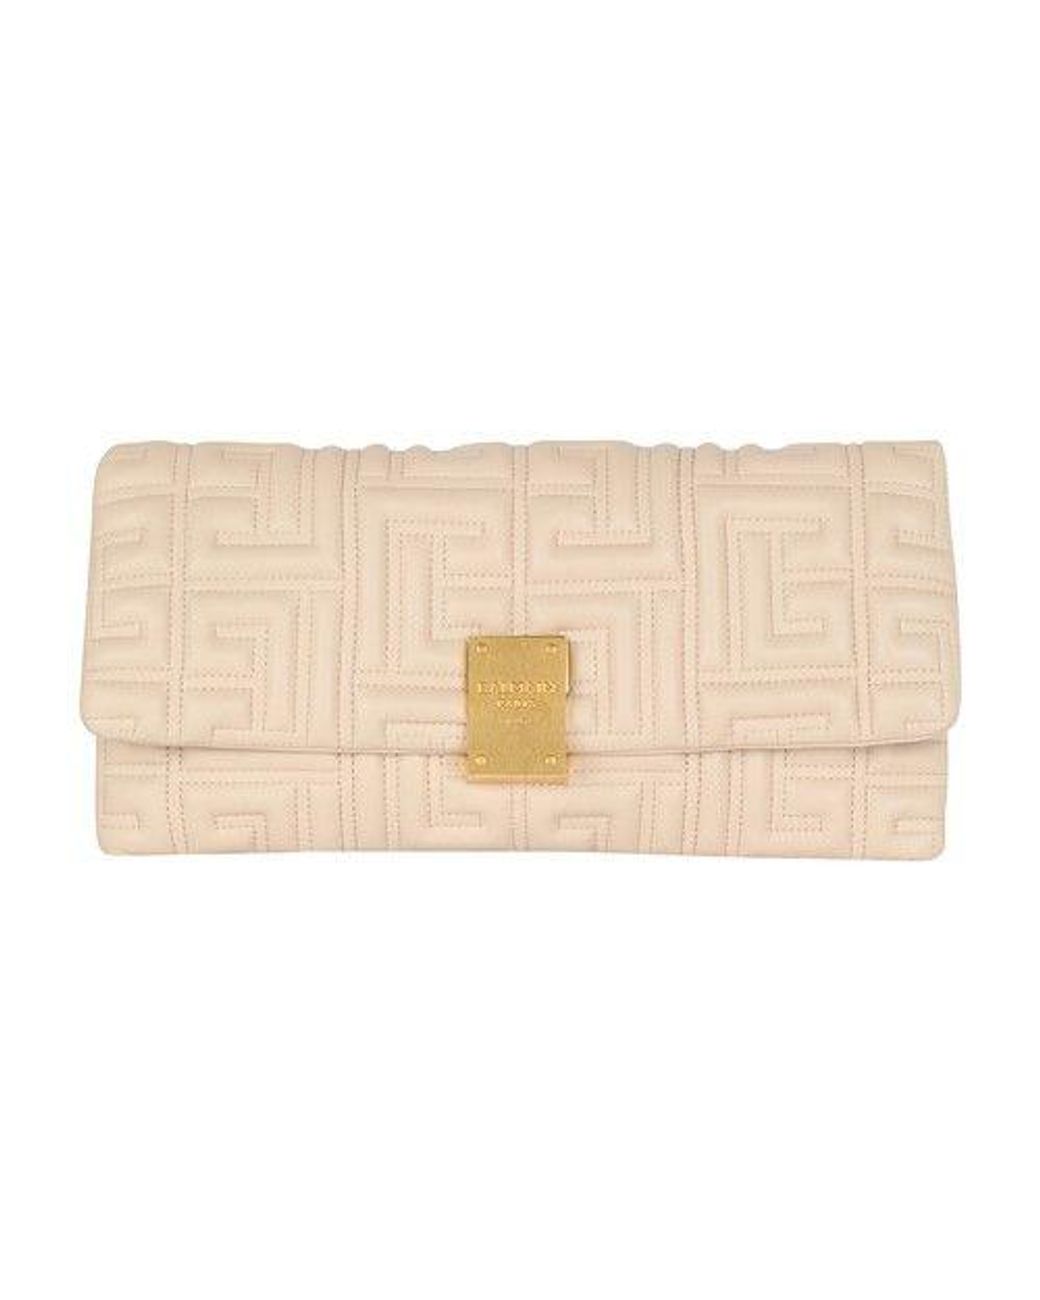 Balmain 1945 Soft Quilted Leather Clutch Bag in Natural | Lyst